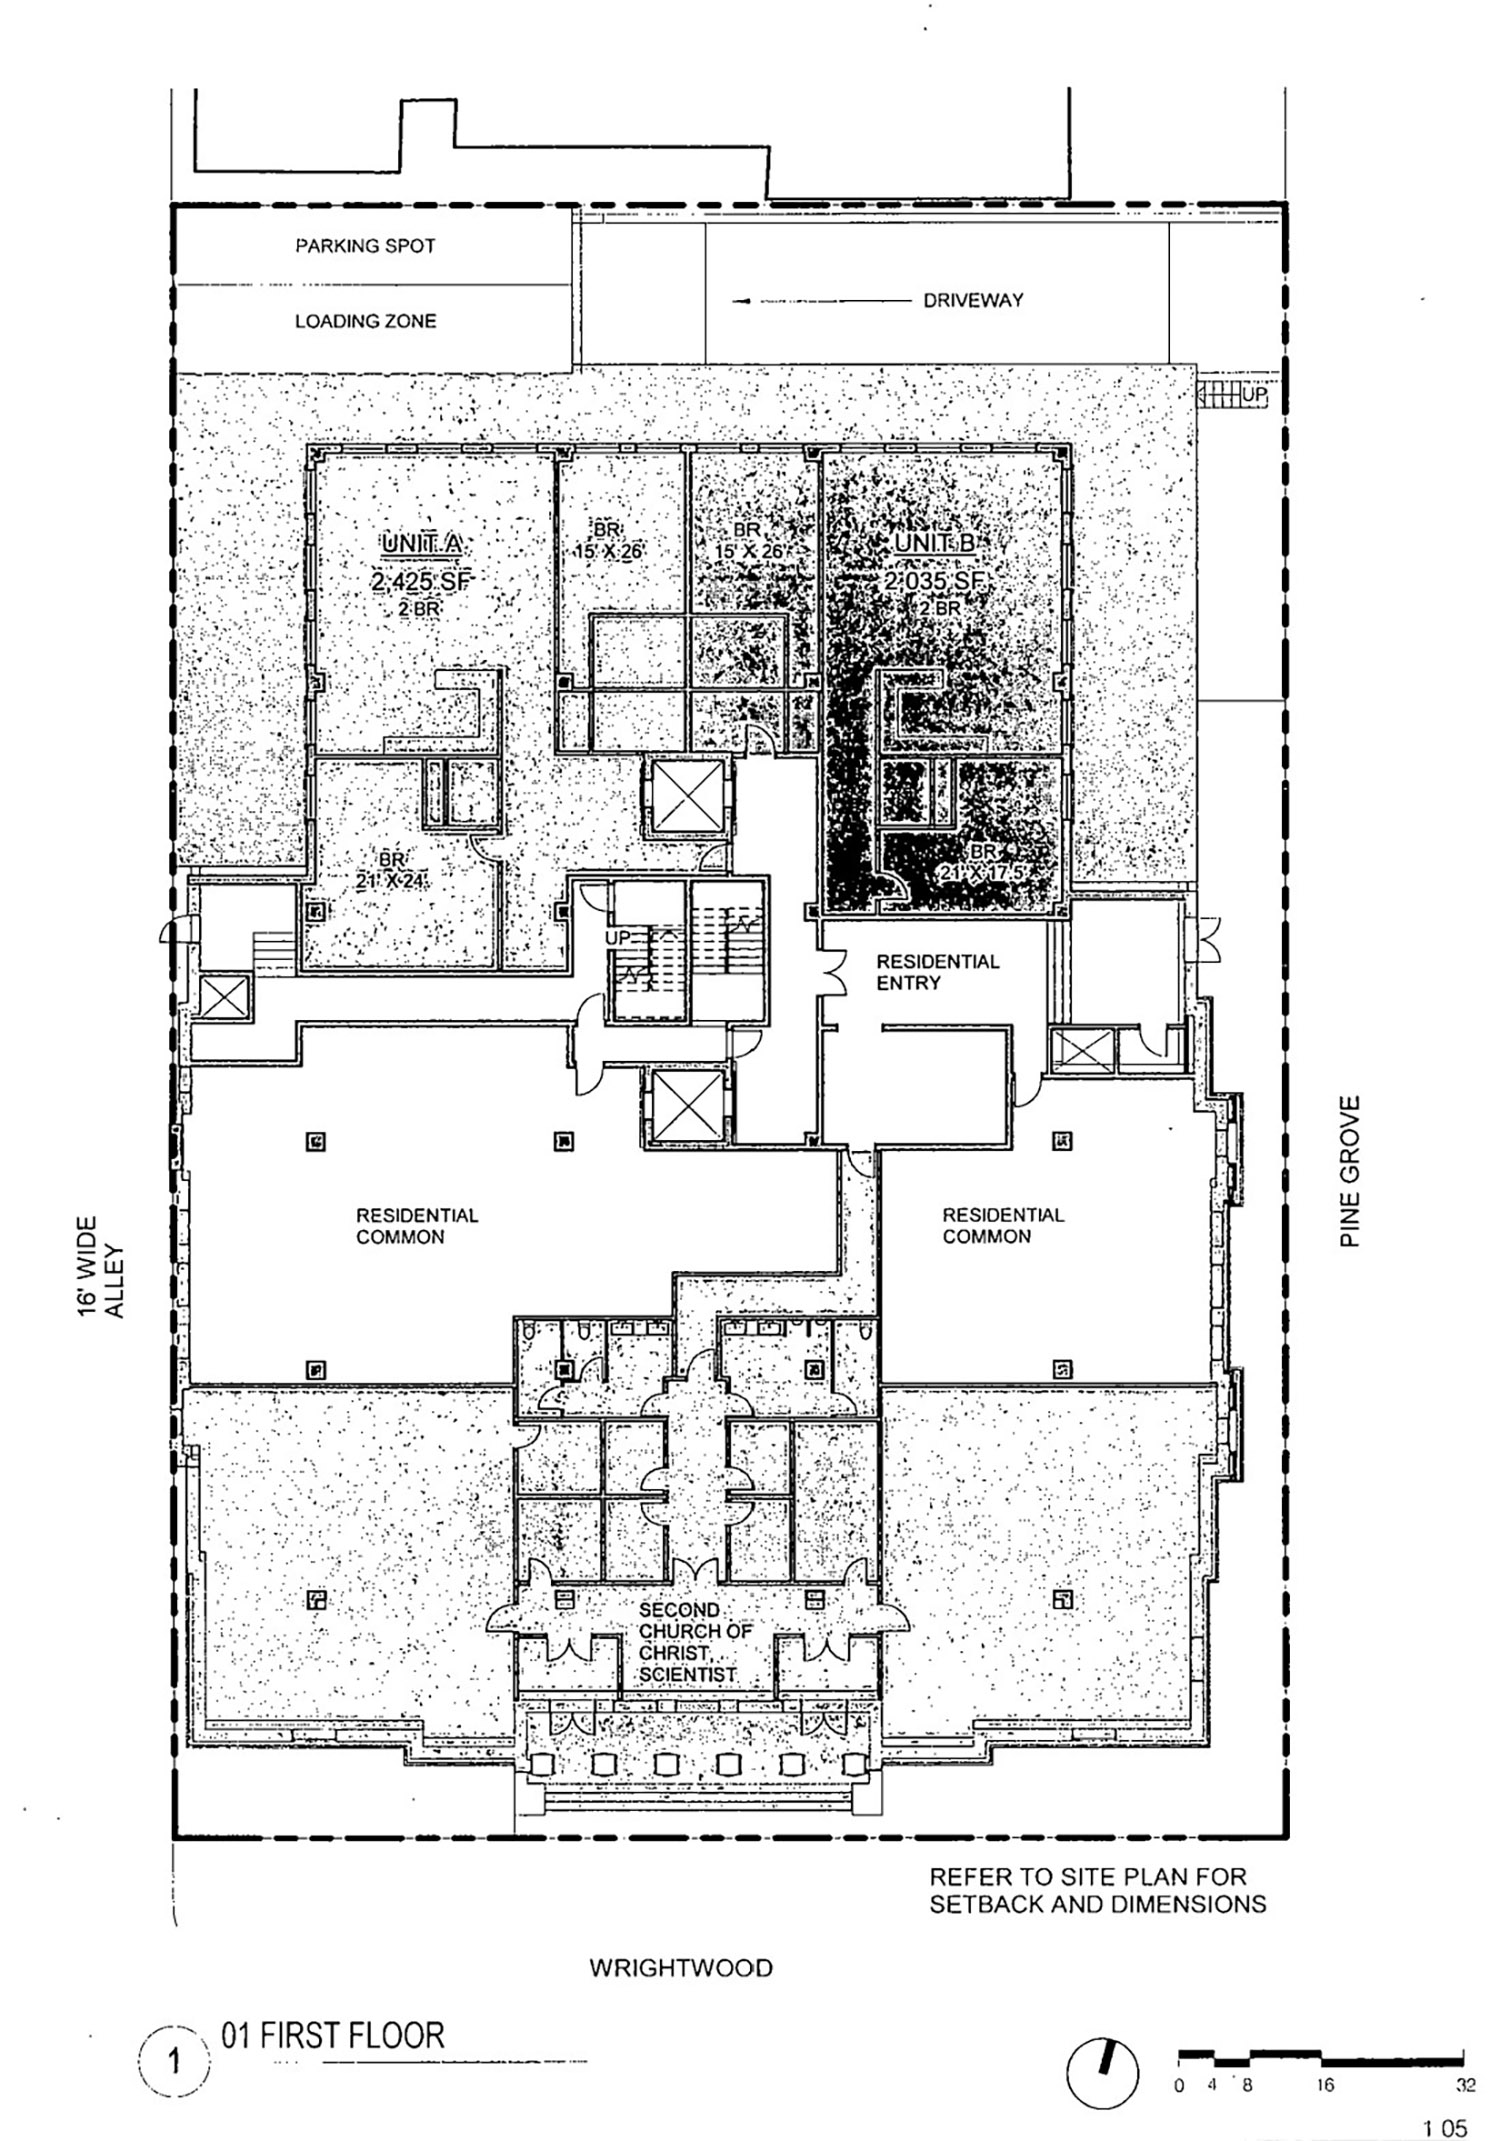 First Floor Plan for 2700 N Pine Grove Avenue. Drawing by Booth Hansen